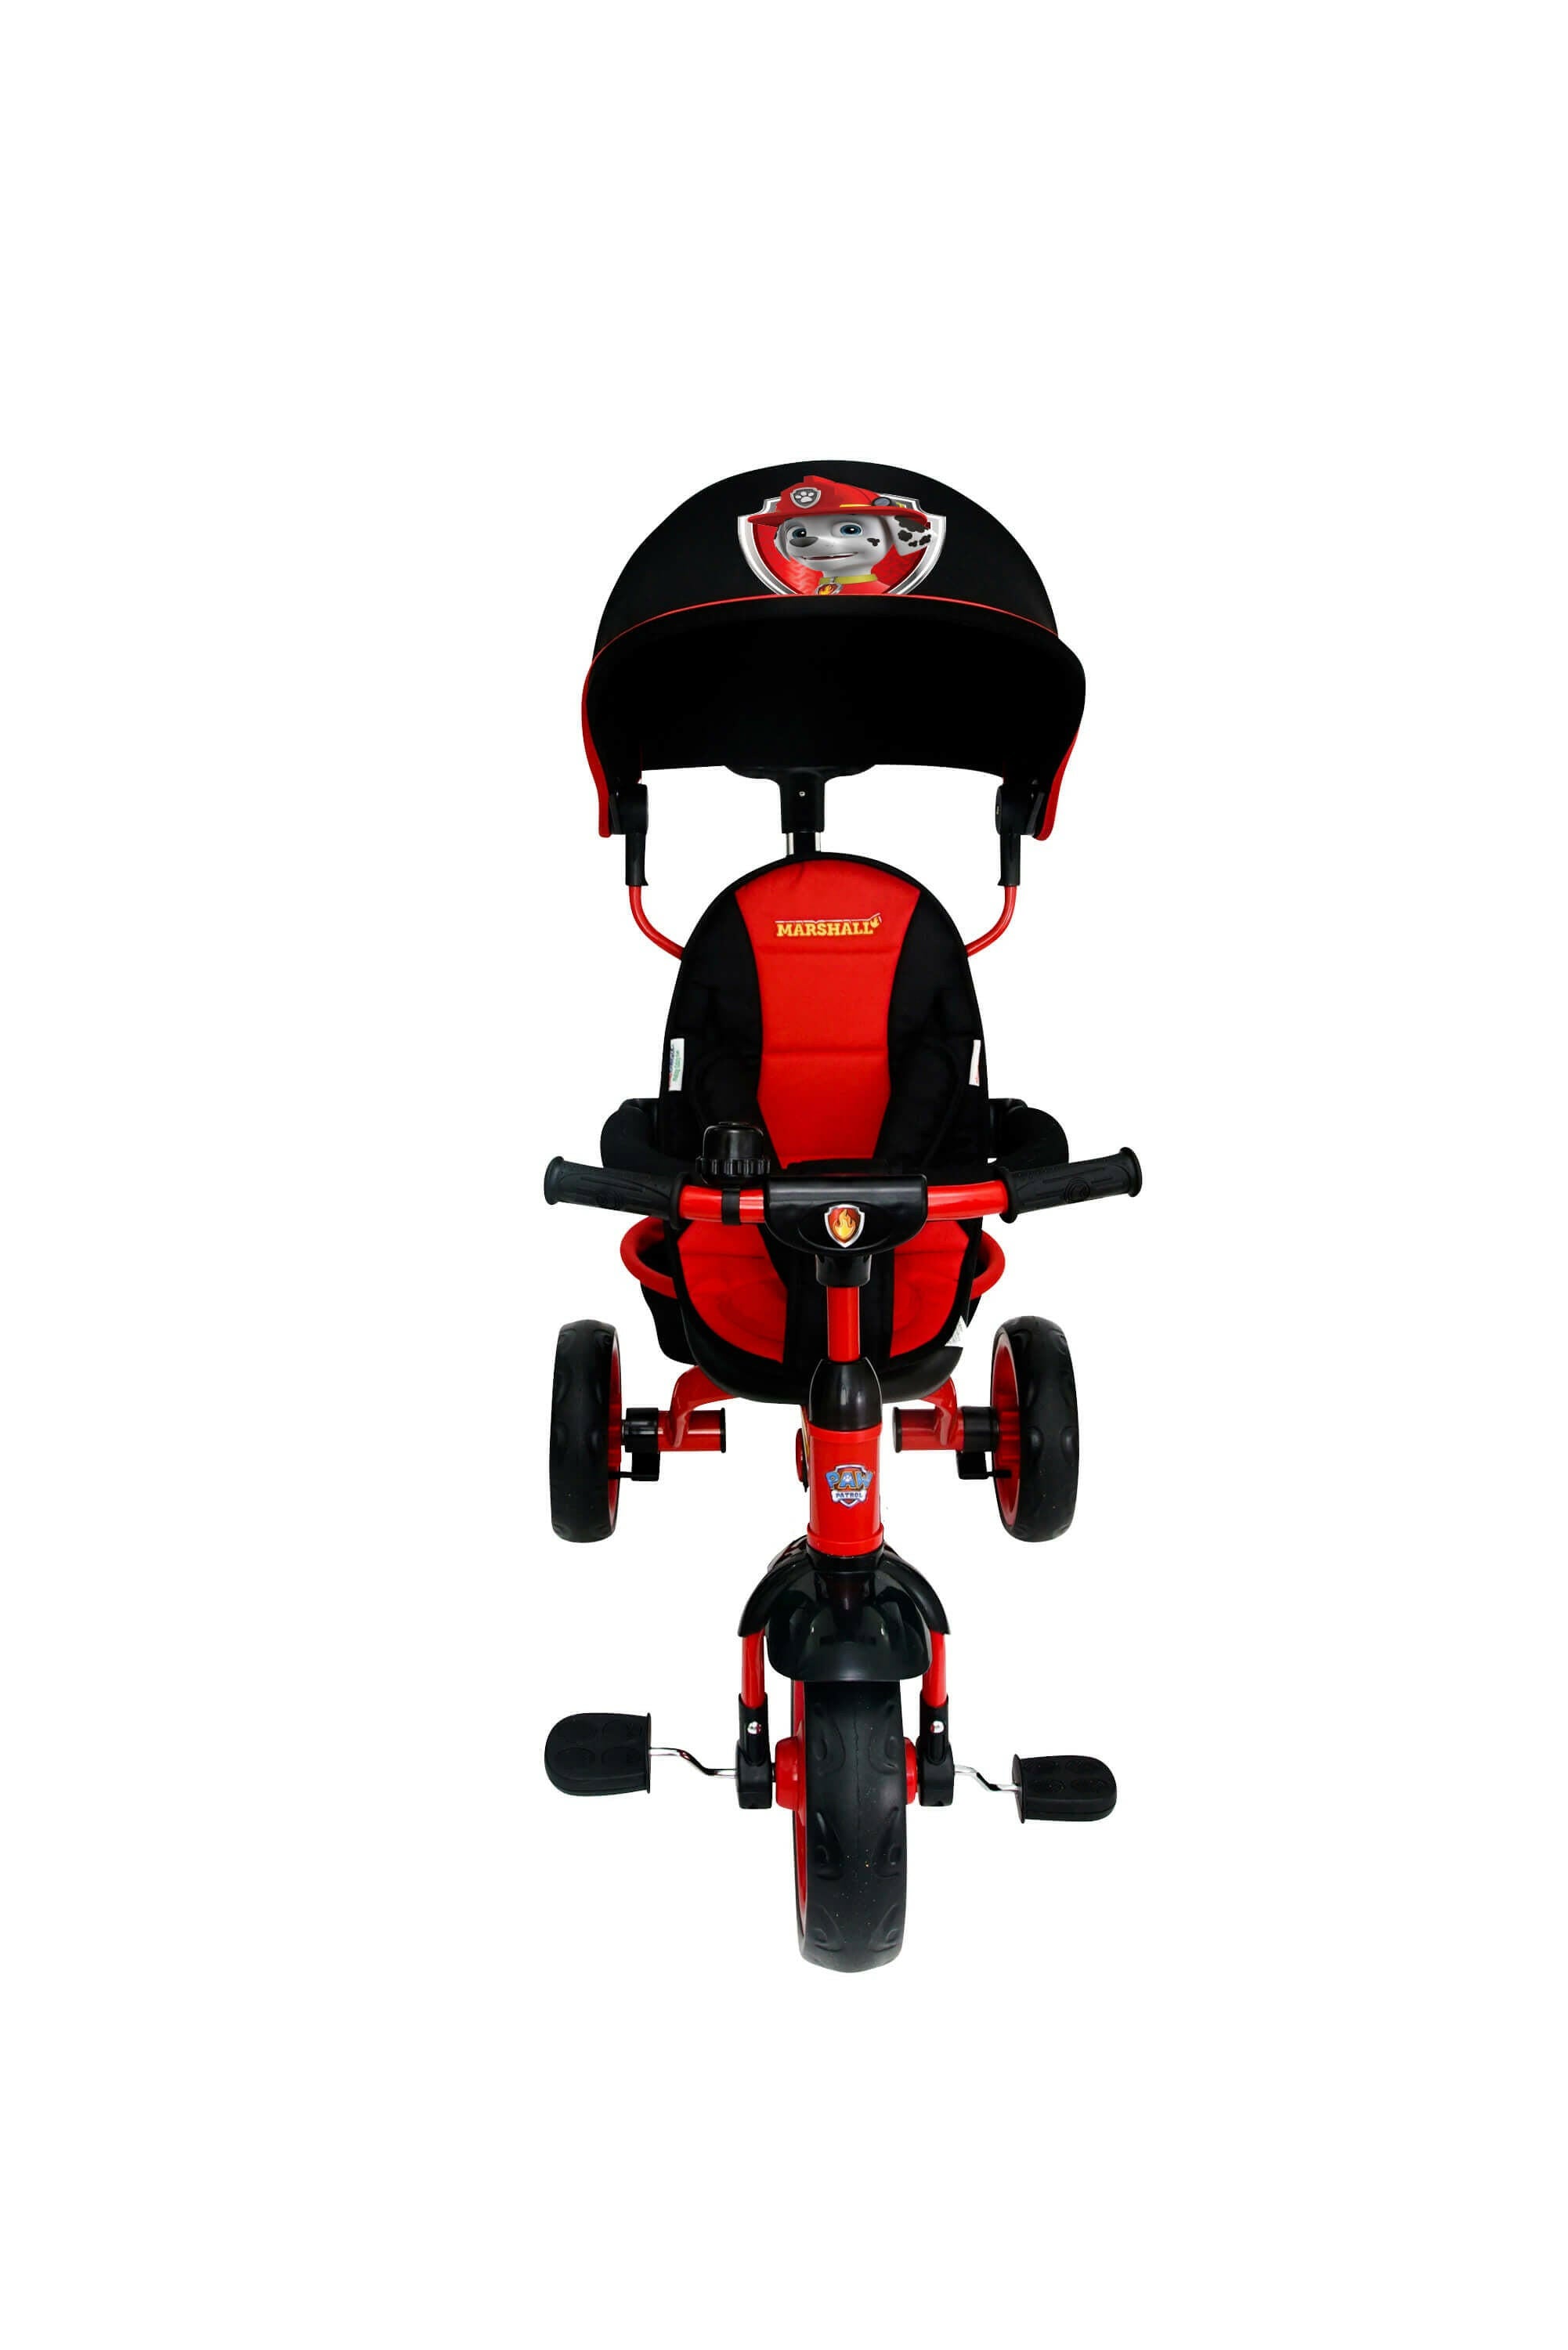 Kids Nickelodeon Paw Patrol Marshall 4-in-1 Push and Ride Stroller Tricycle - Kids Eye Candy 